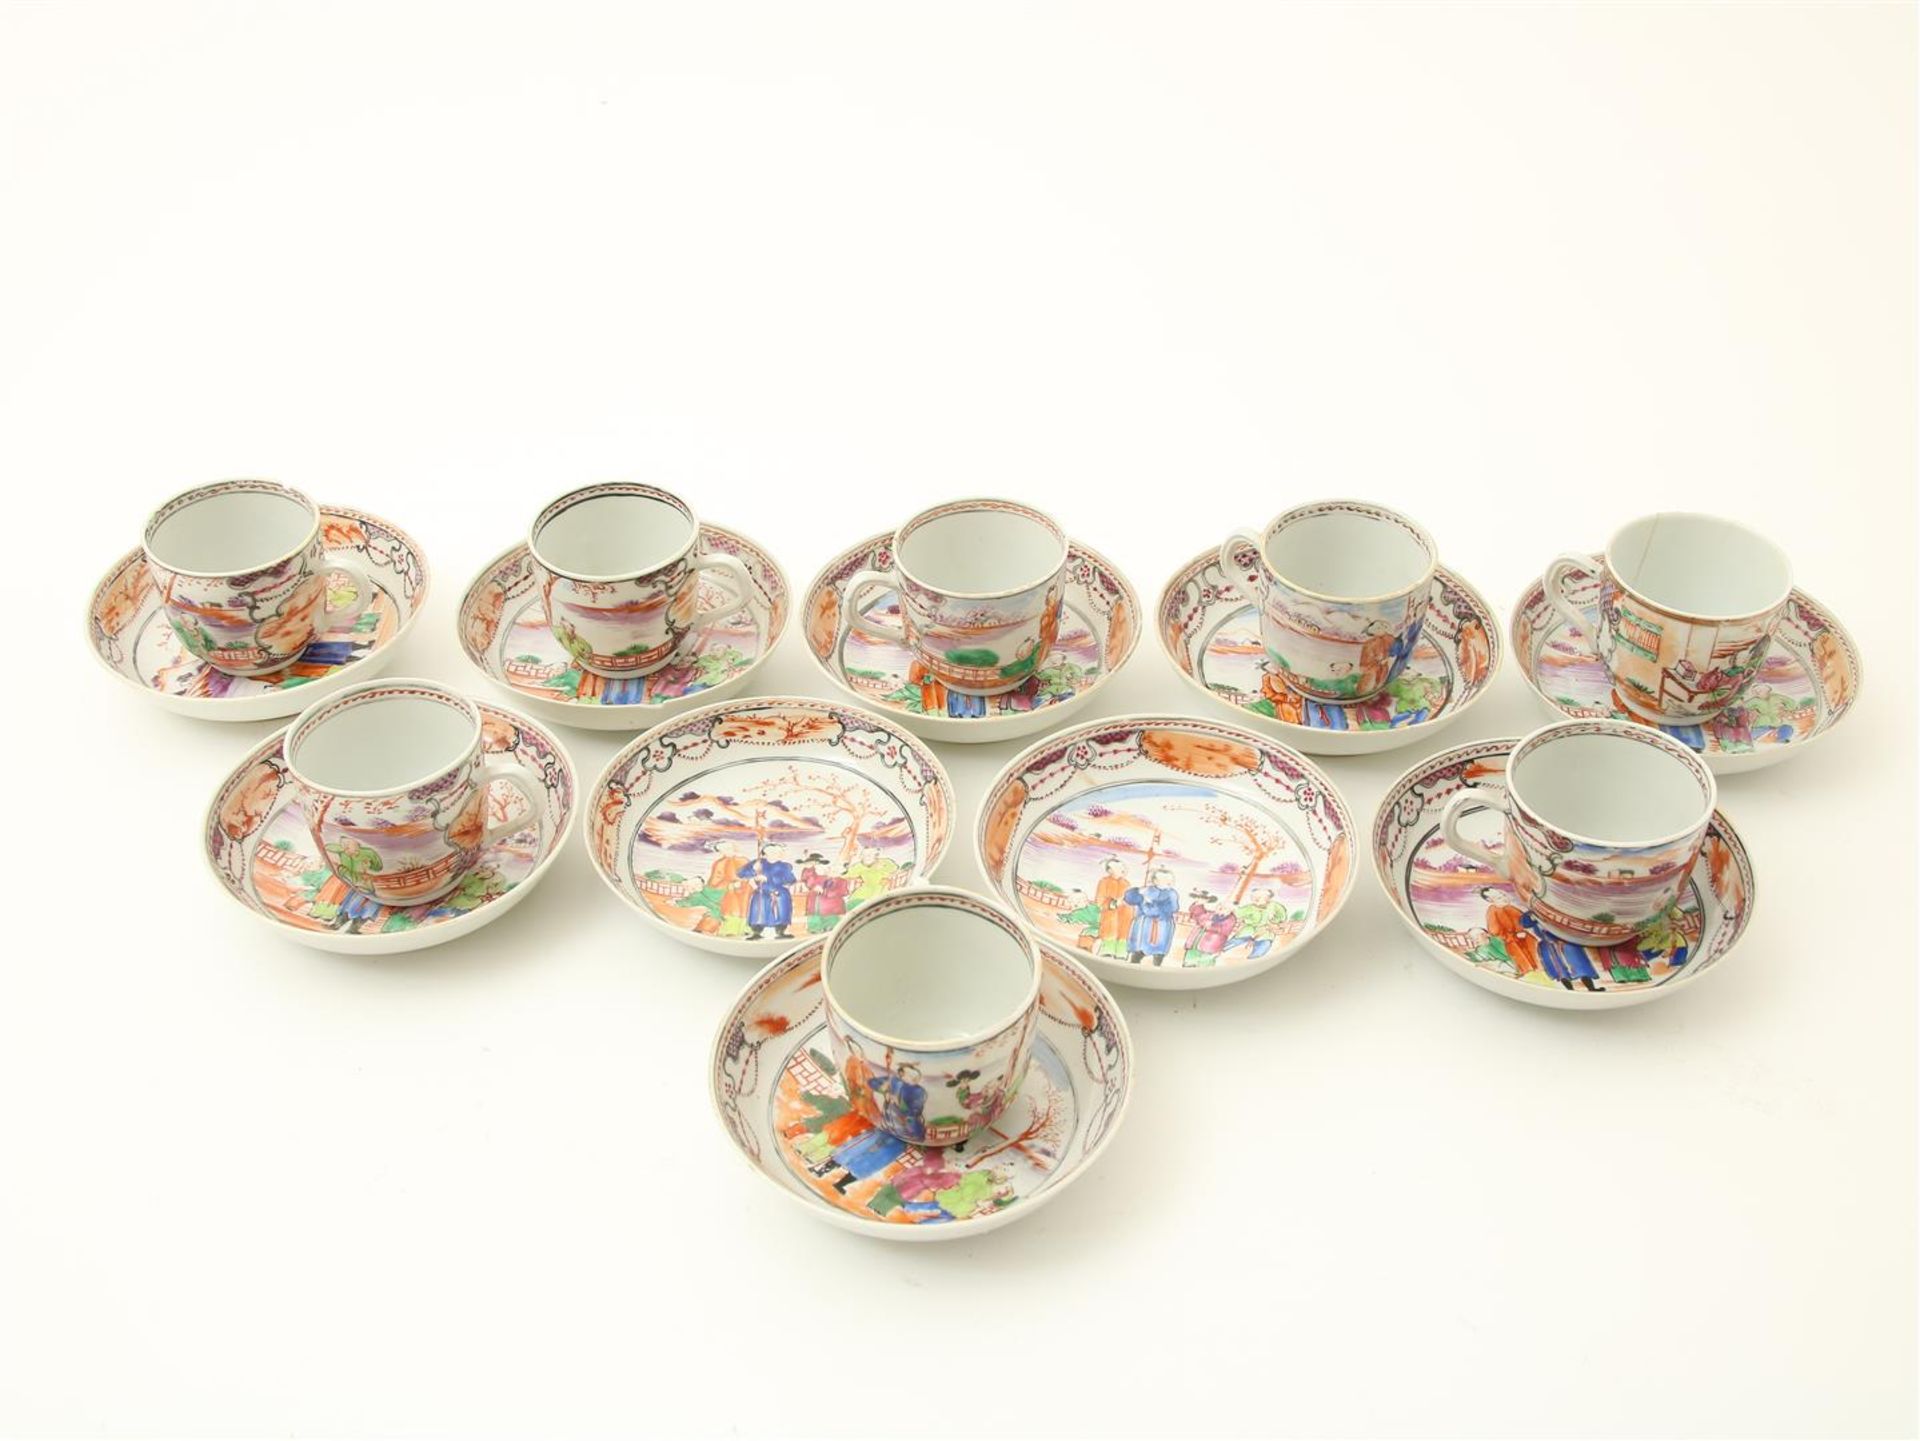 Series of 8 Qianlong porcelain cups and 10 saucers with mandarin decor of figures in landscape,